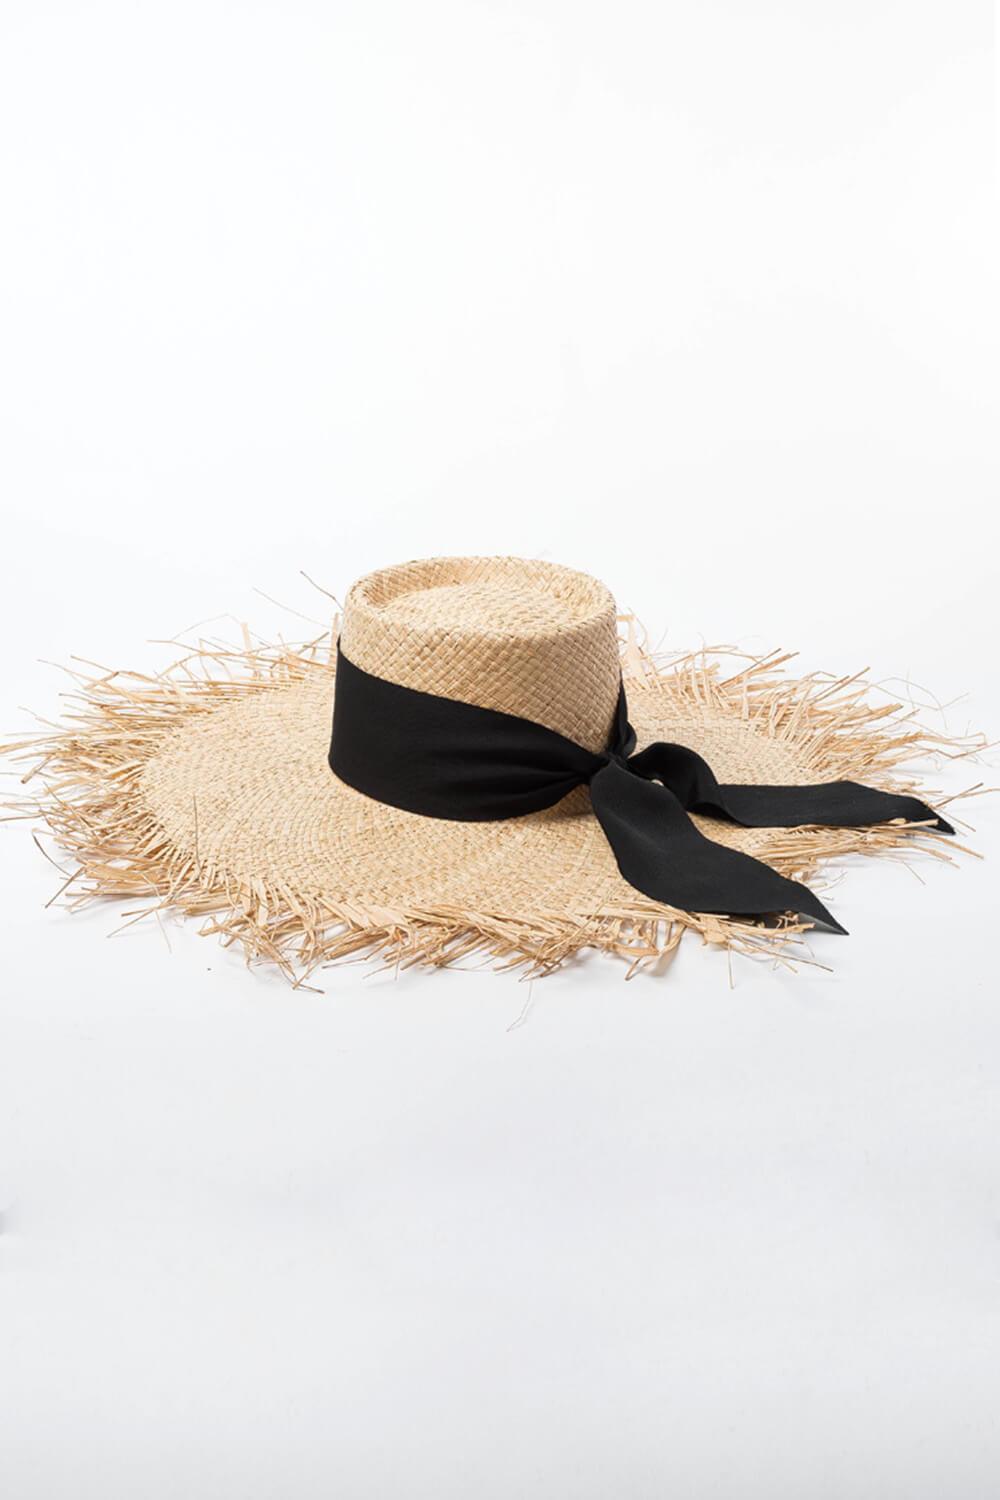 Raffia Straw Open Weave Flat Boater With Bow Ribbon Trim